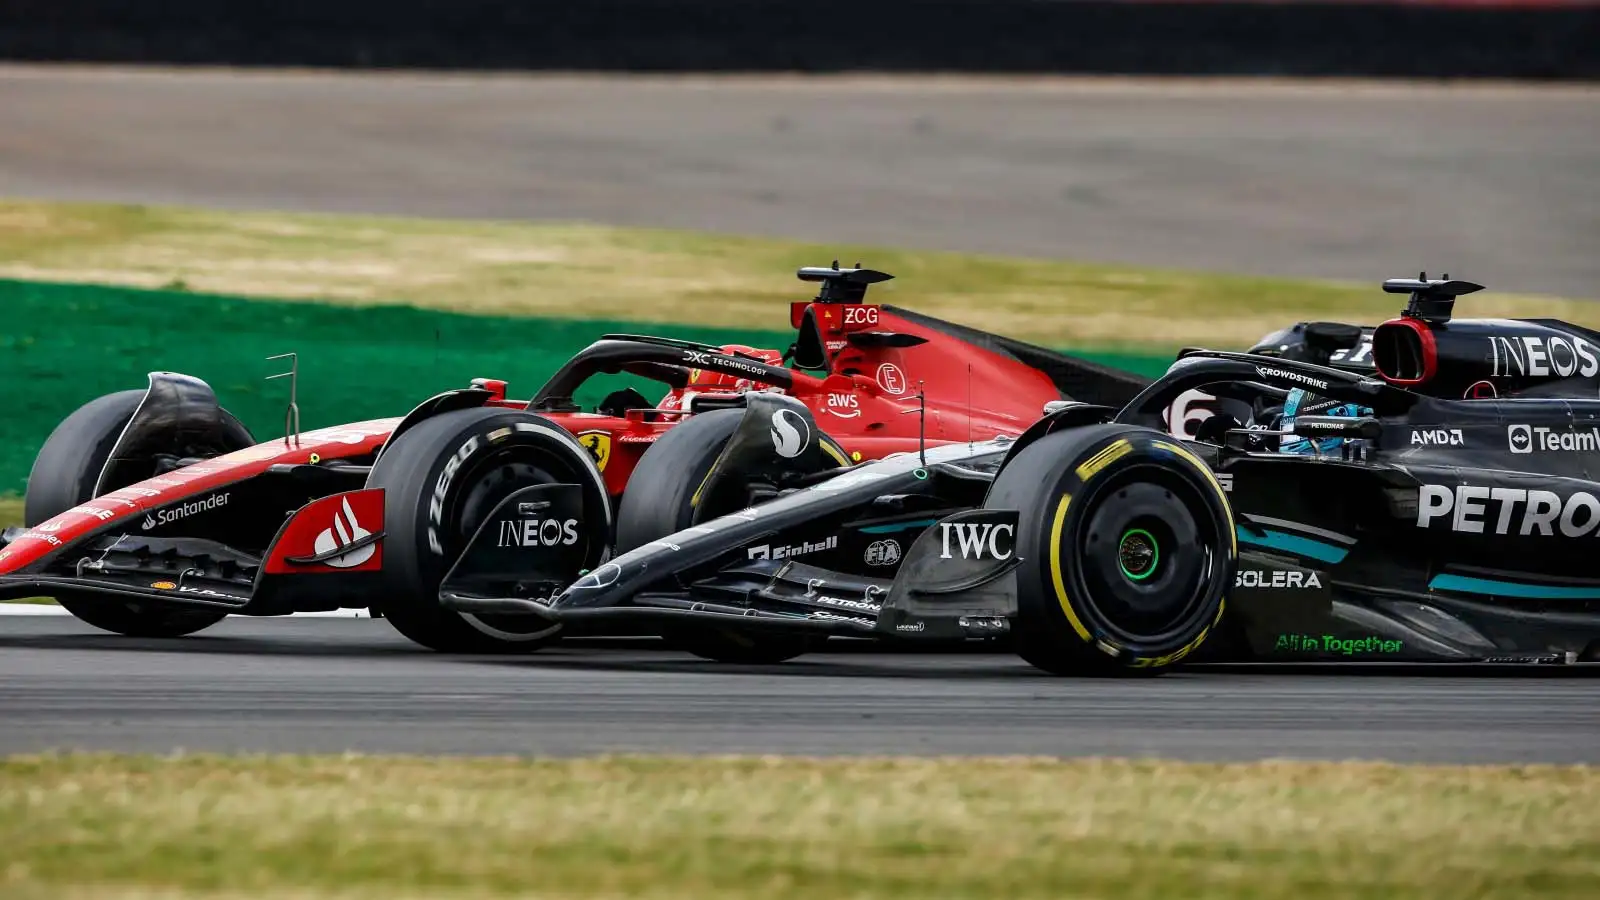 Charles Leclerc goes side-by-side with George Russell as the Mercedes driver overtakes around the outside at Luffield.